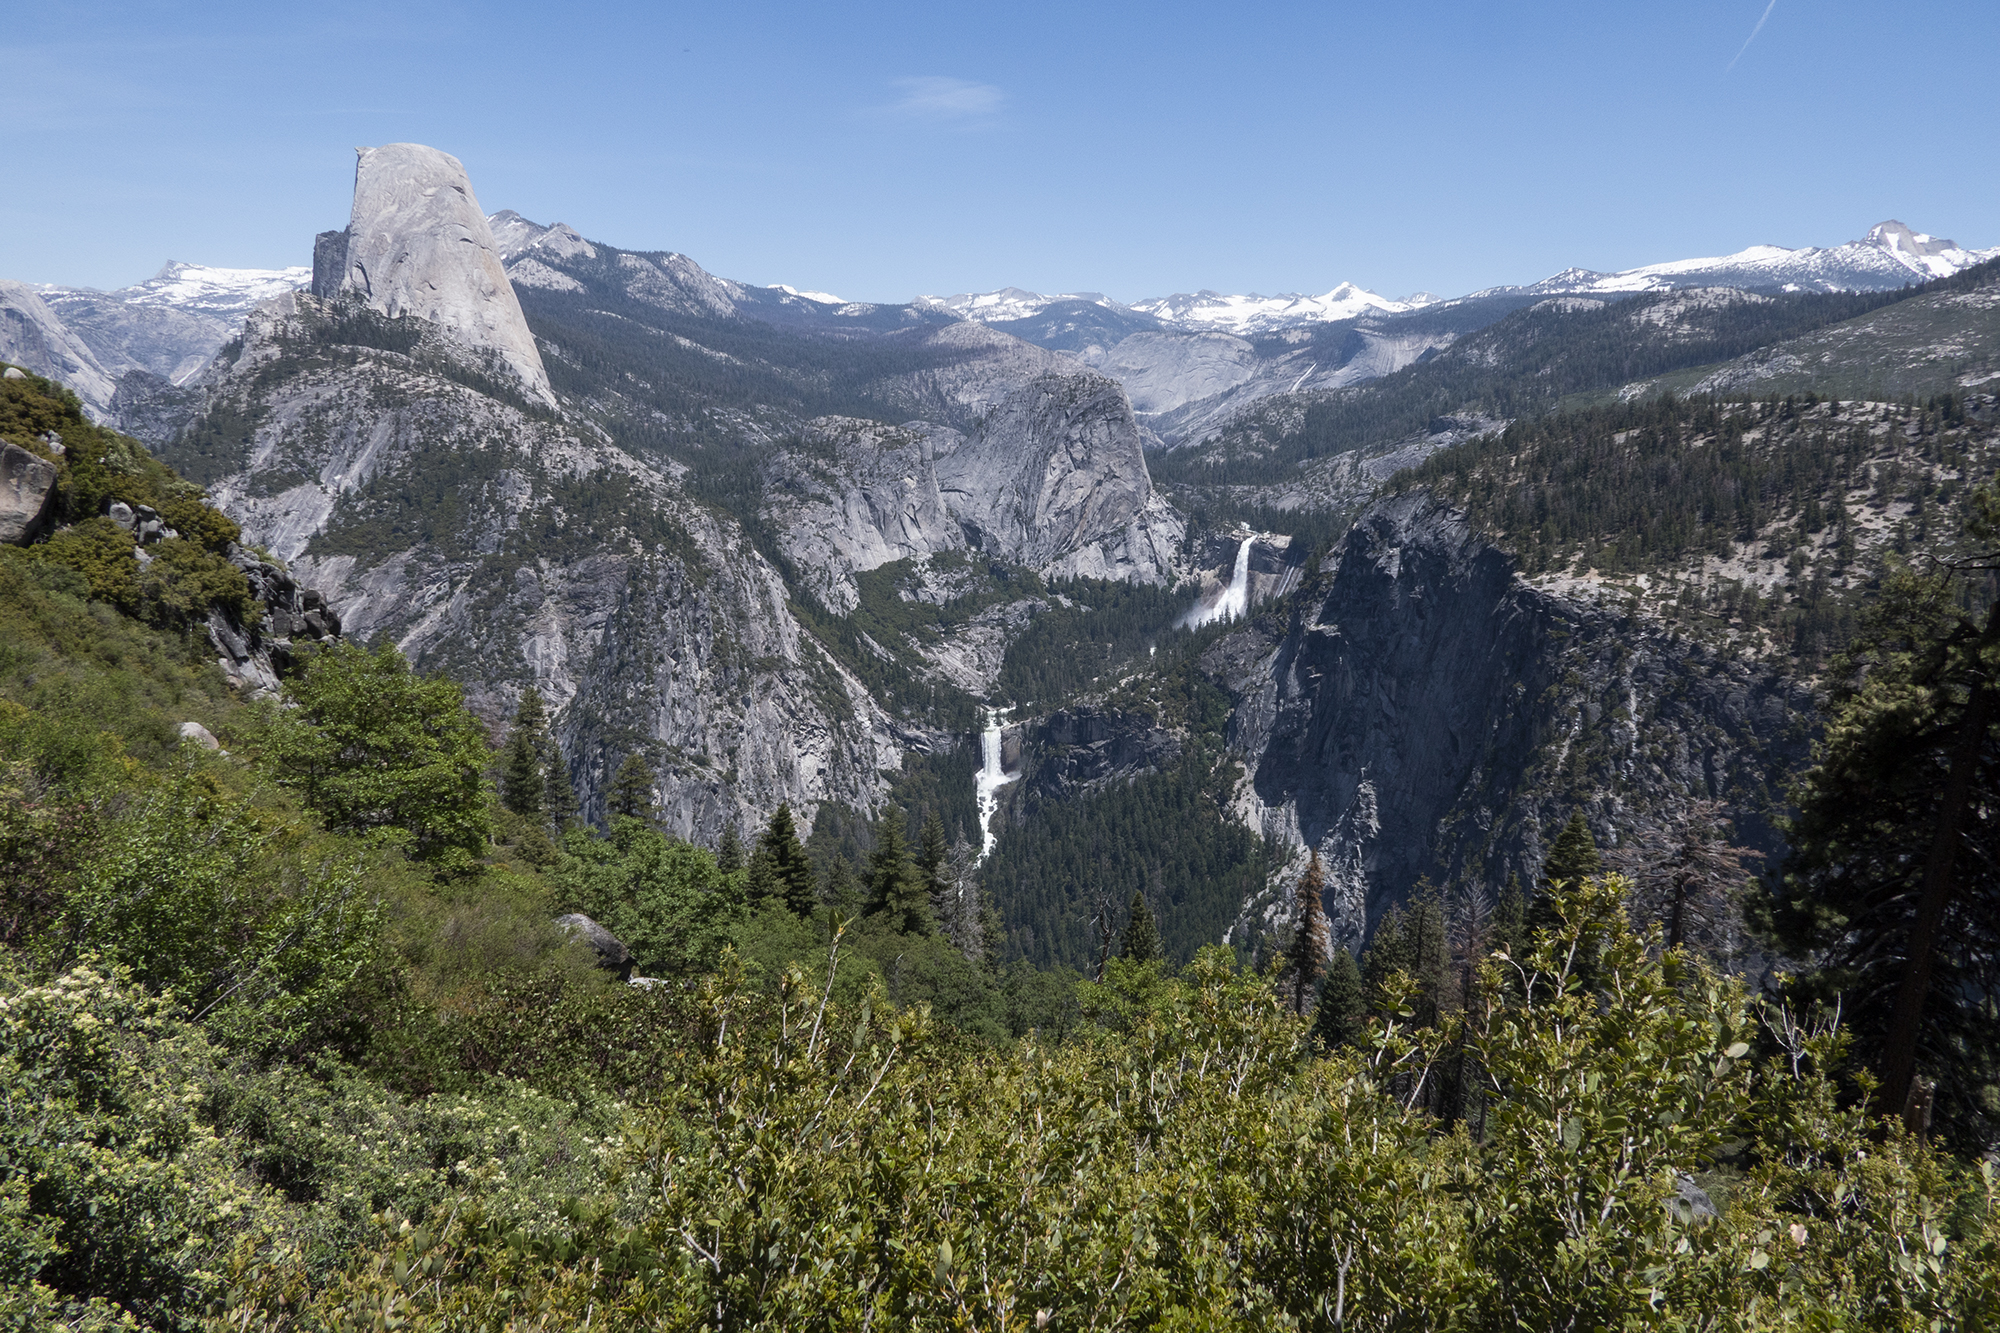 Four Mile Trail, Glacier Point, and the Panorama Trail